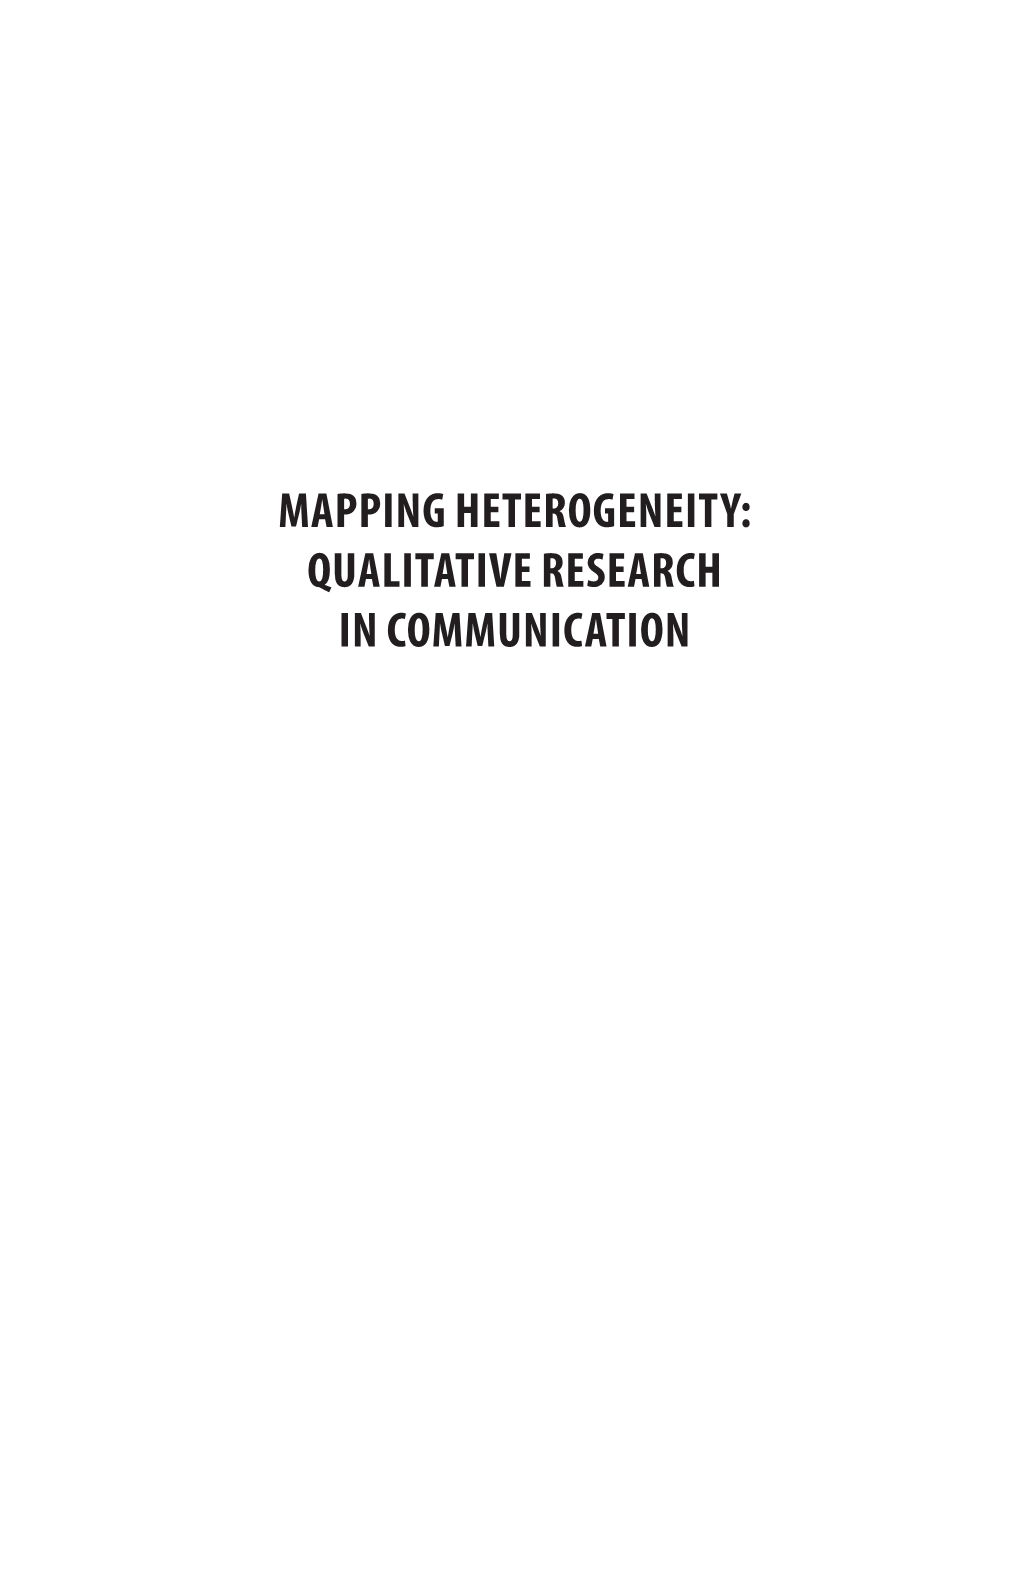 Mapping Heterogeneity: Qualitative Research in Communication